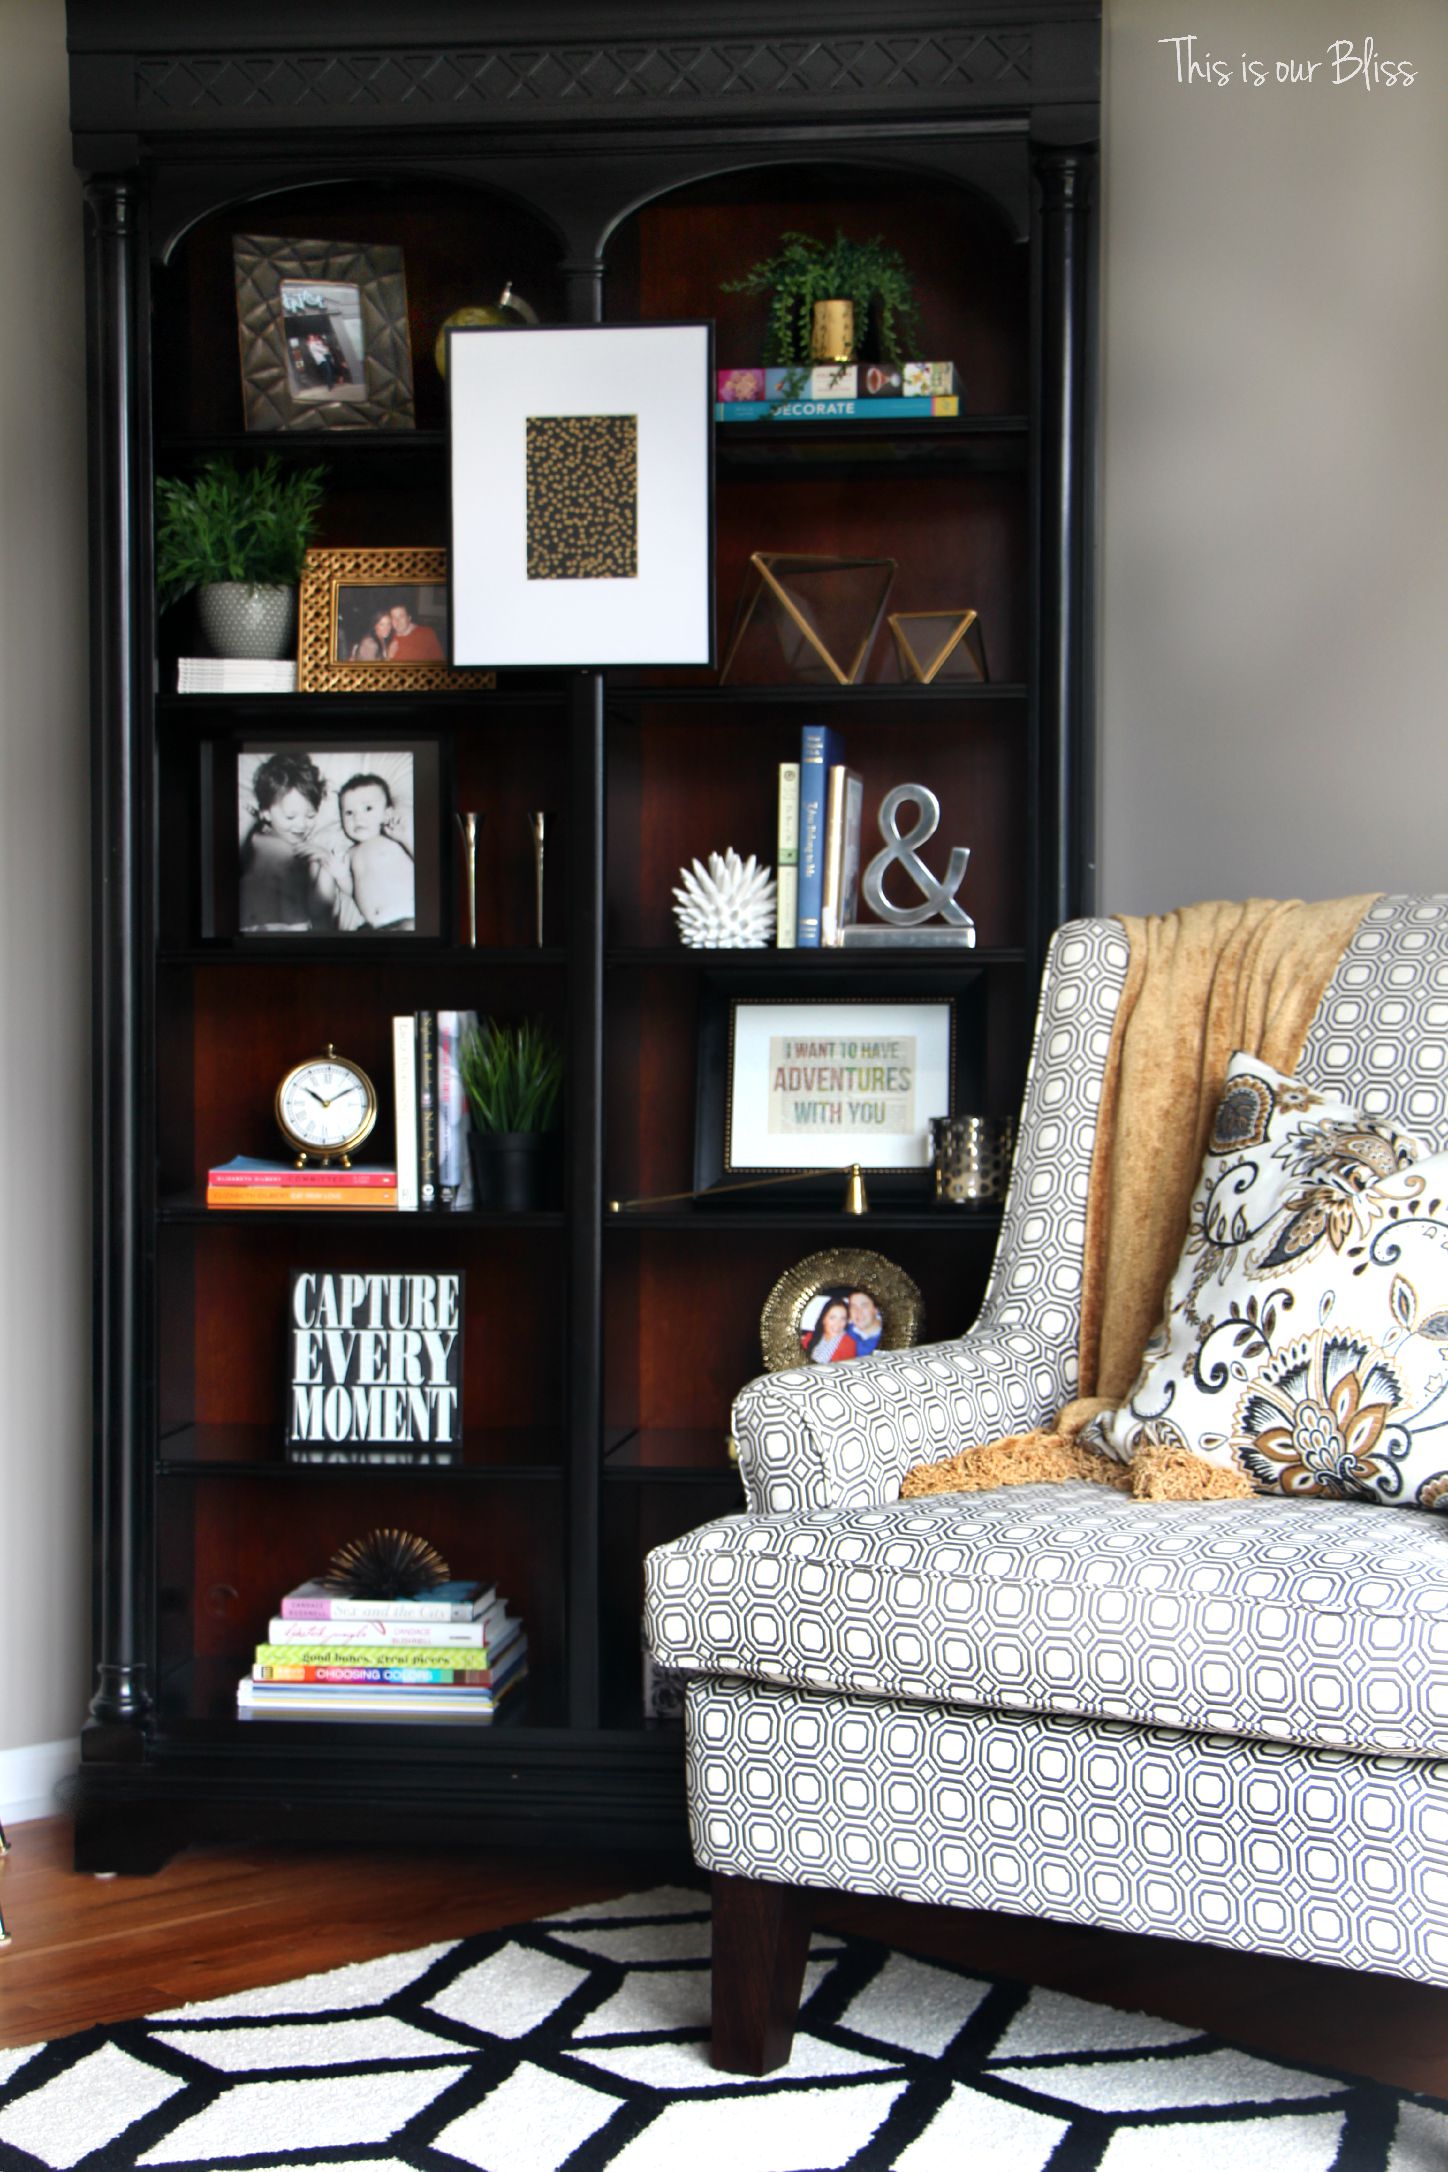 How to update an old bookcase  This is our Bliss